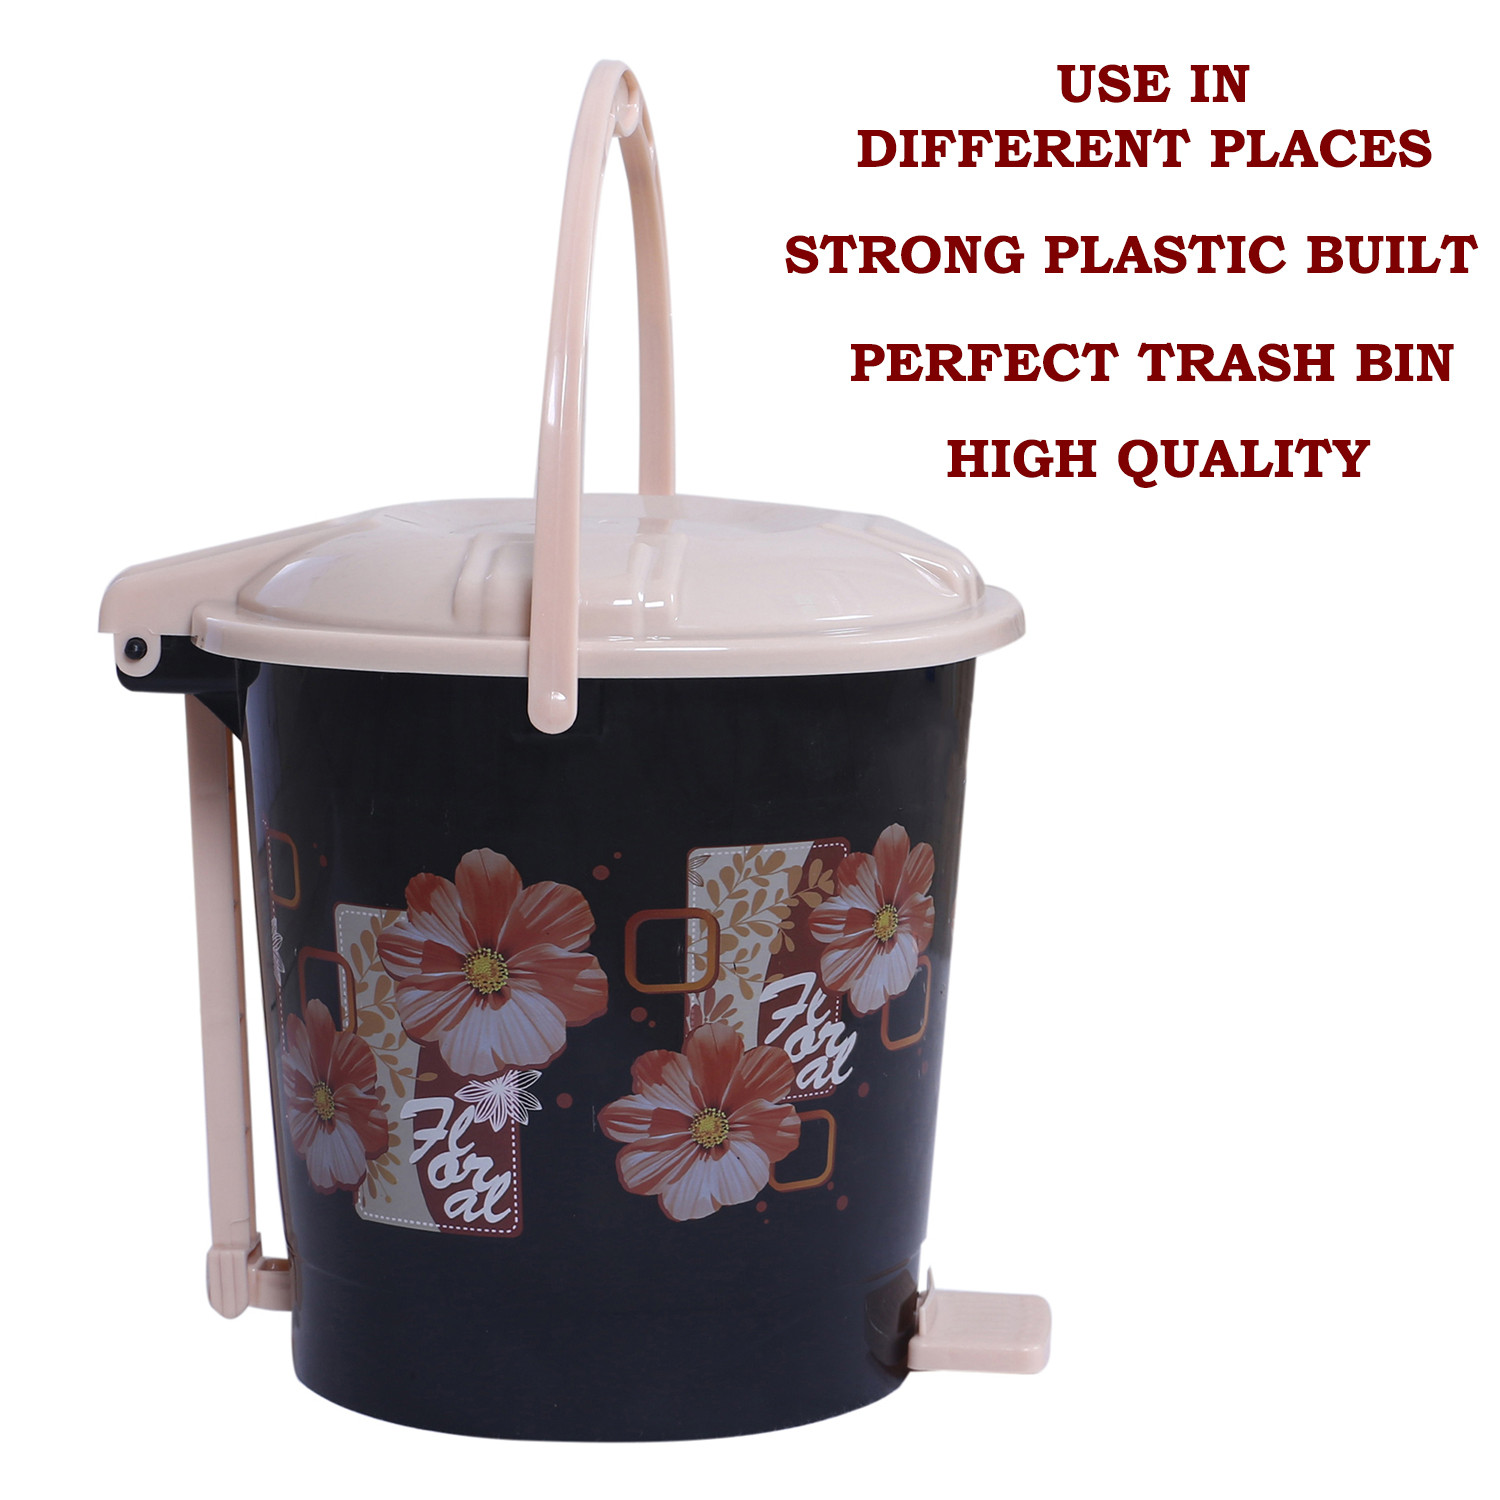 Kuber Industries Durable Floral & Flower Print Plastic Pedal Dustbin|Waste Bin|Trash Can For Kitchen & Home With Handle,7 Litre,Pack of 2 (Black)